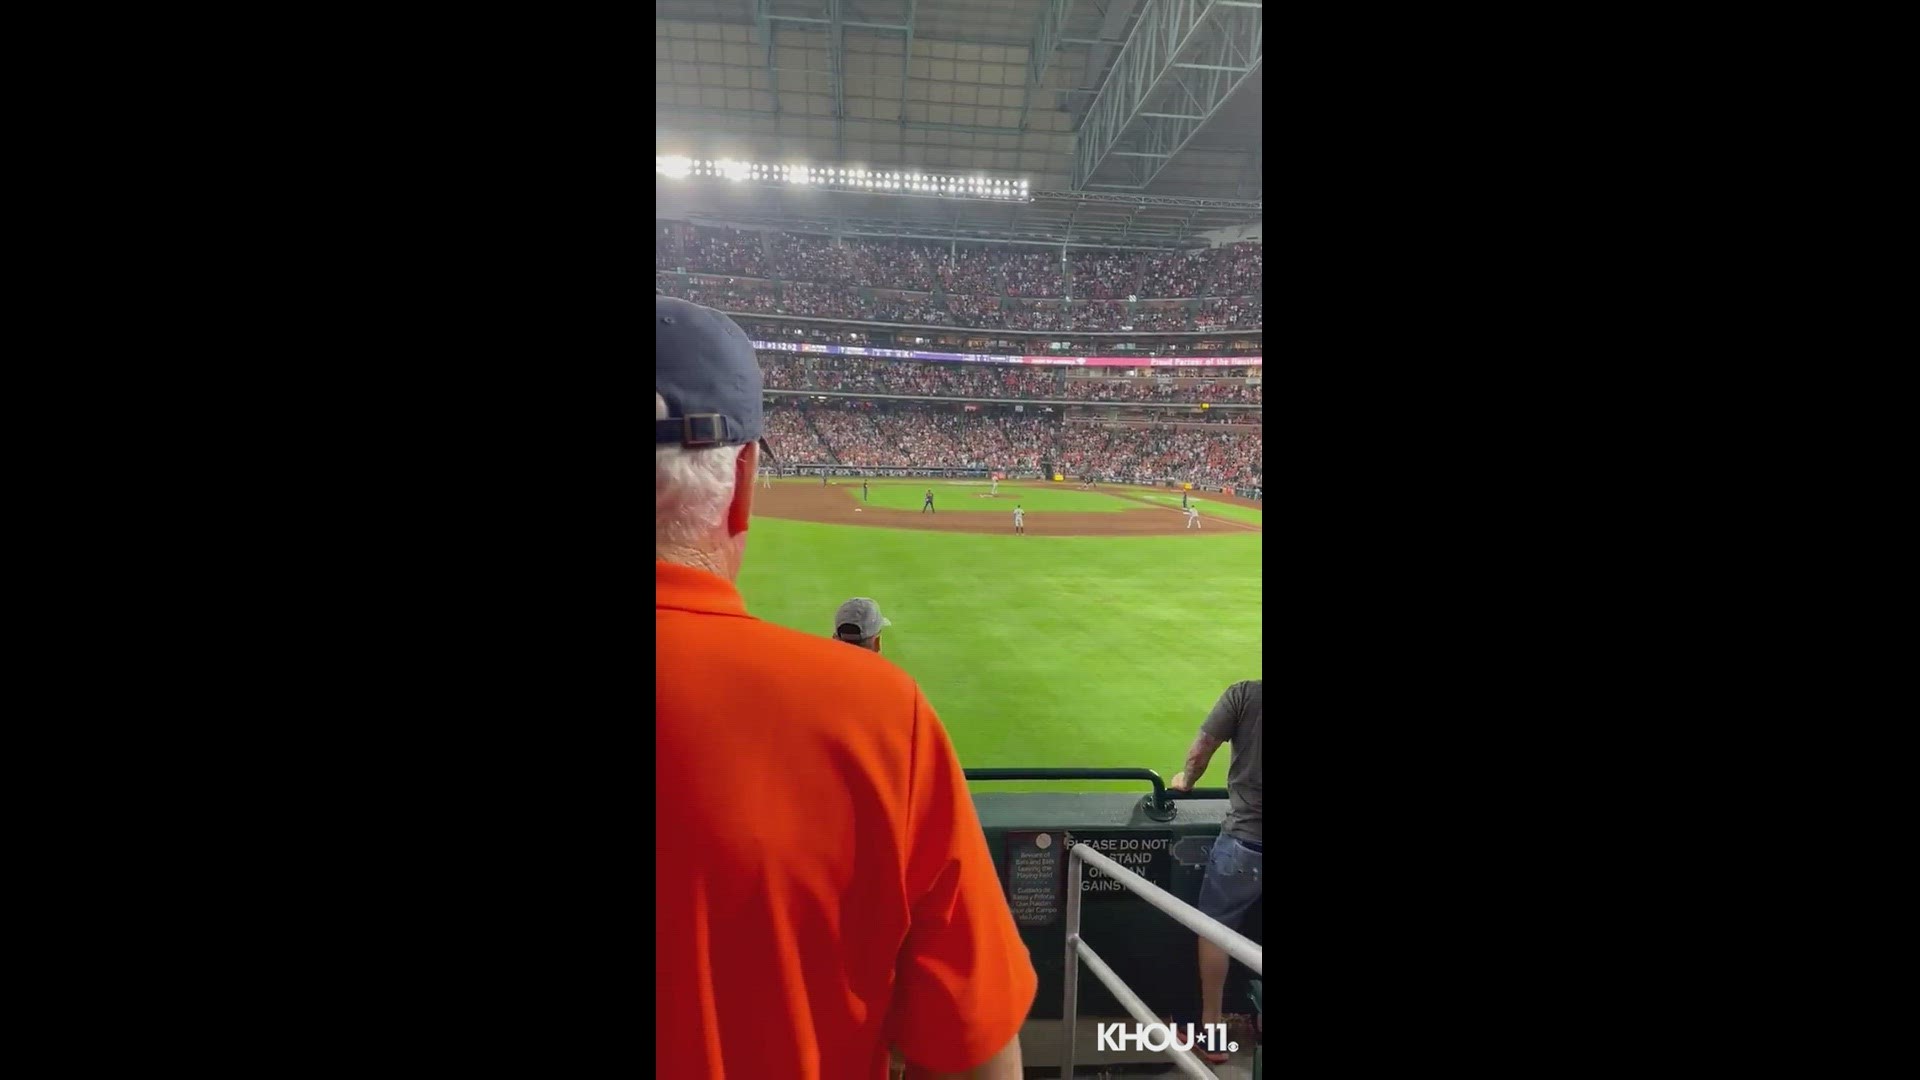 “Hit a home run for my Grammie!” Astros star Jose Altuve came through in a big way for the young fan during Monday’s game at Minute Maid Park.